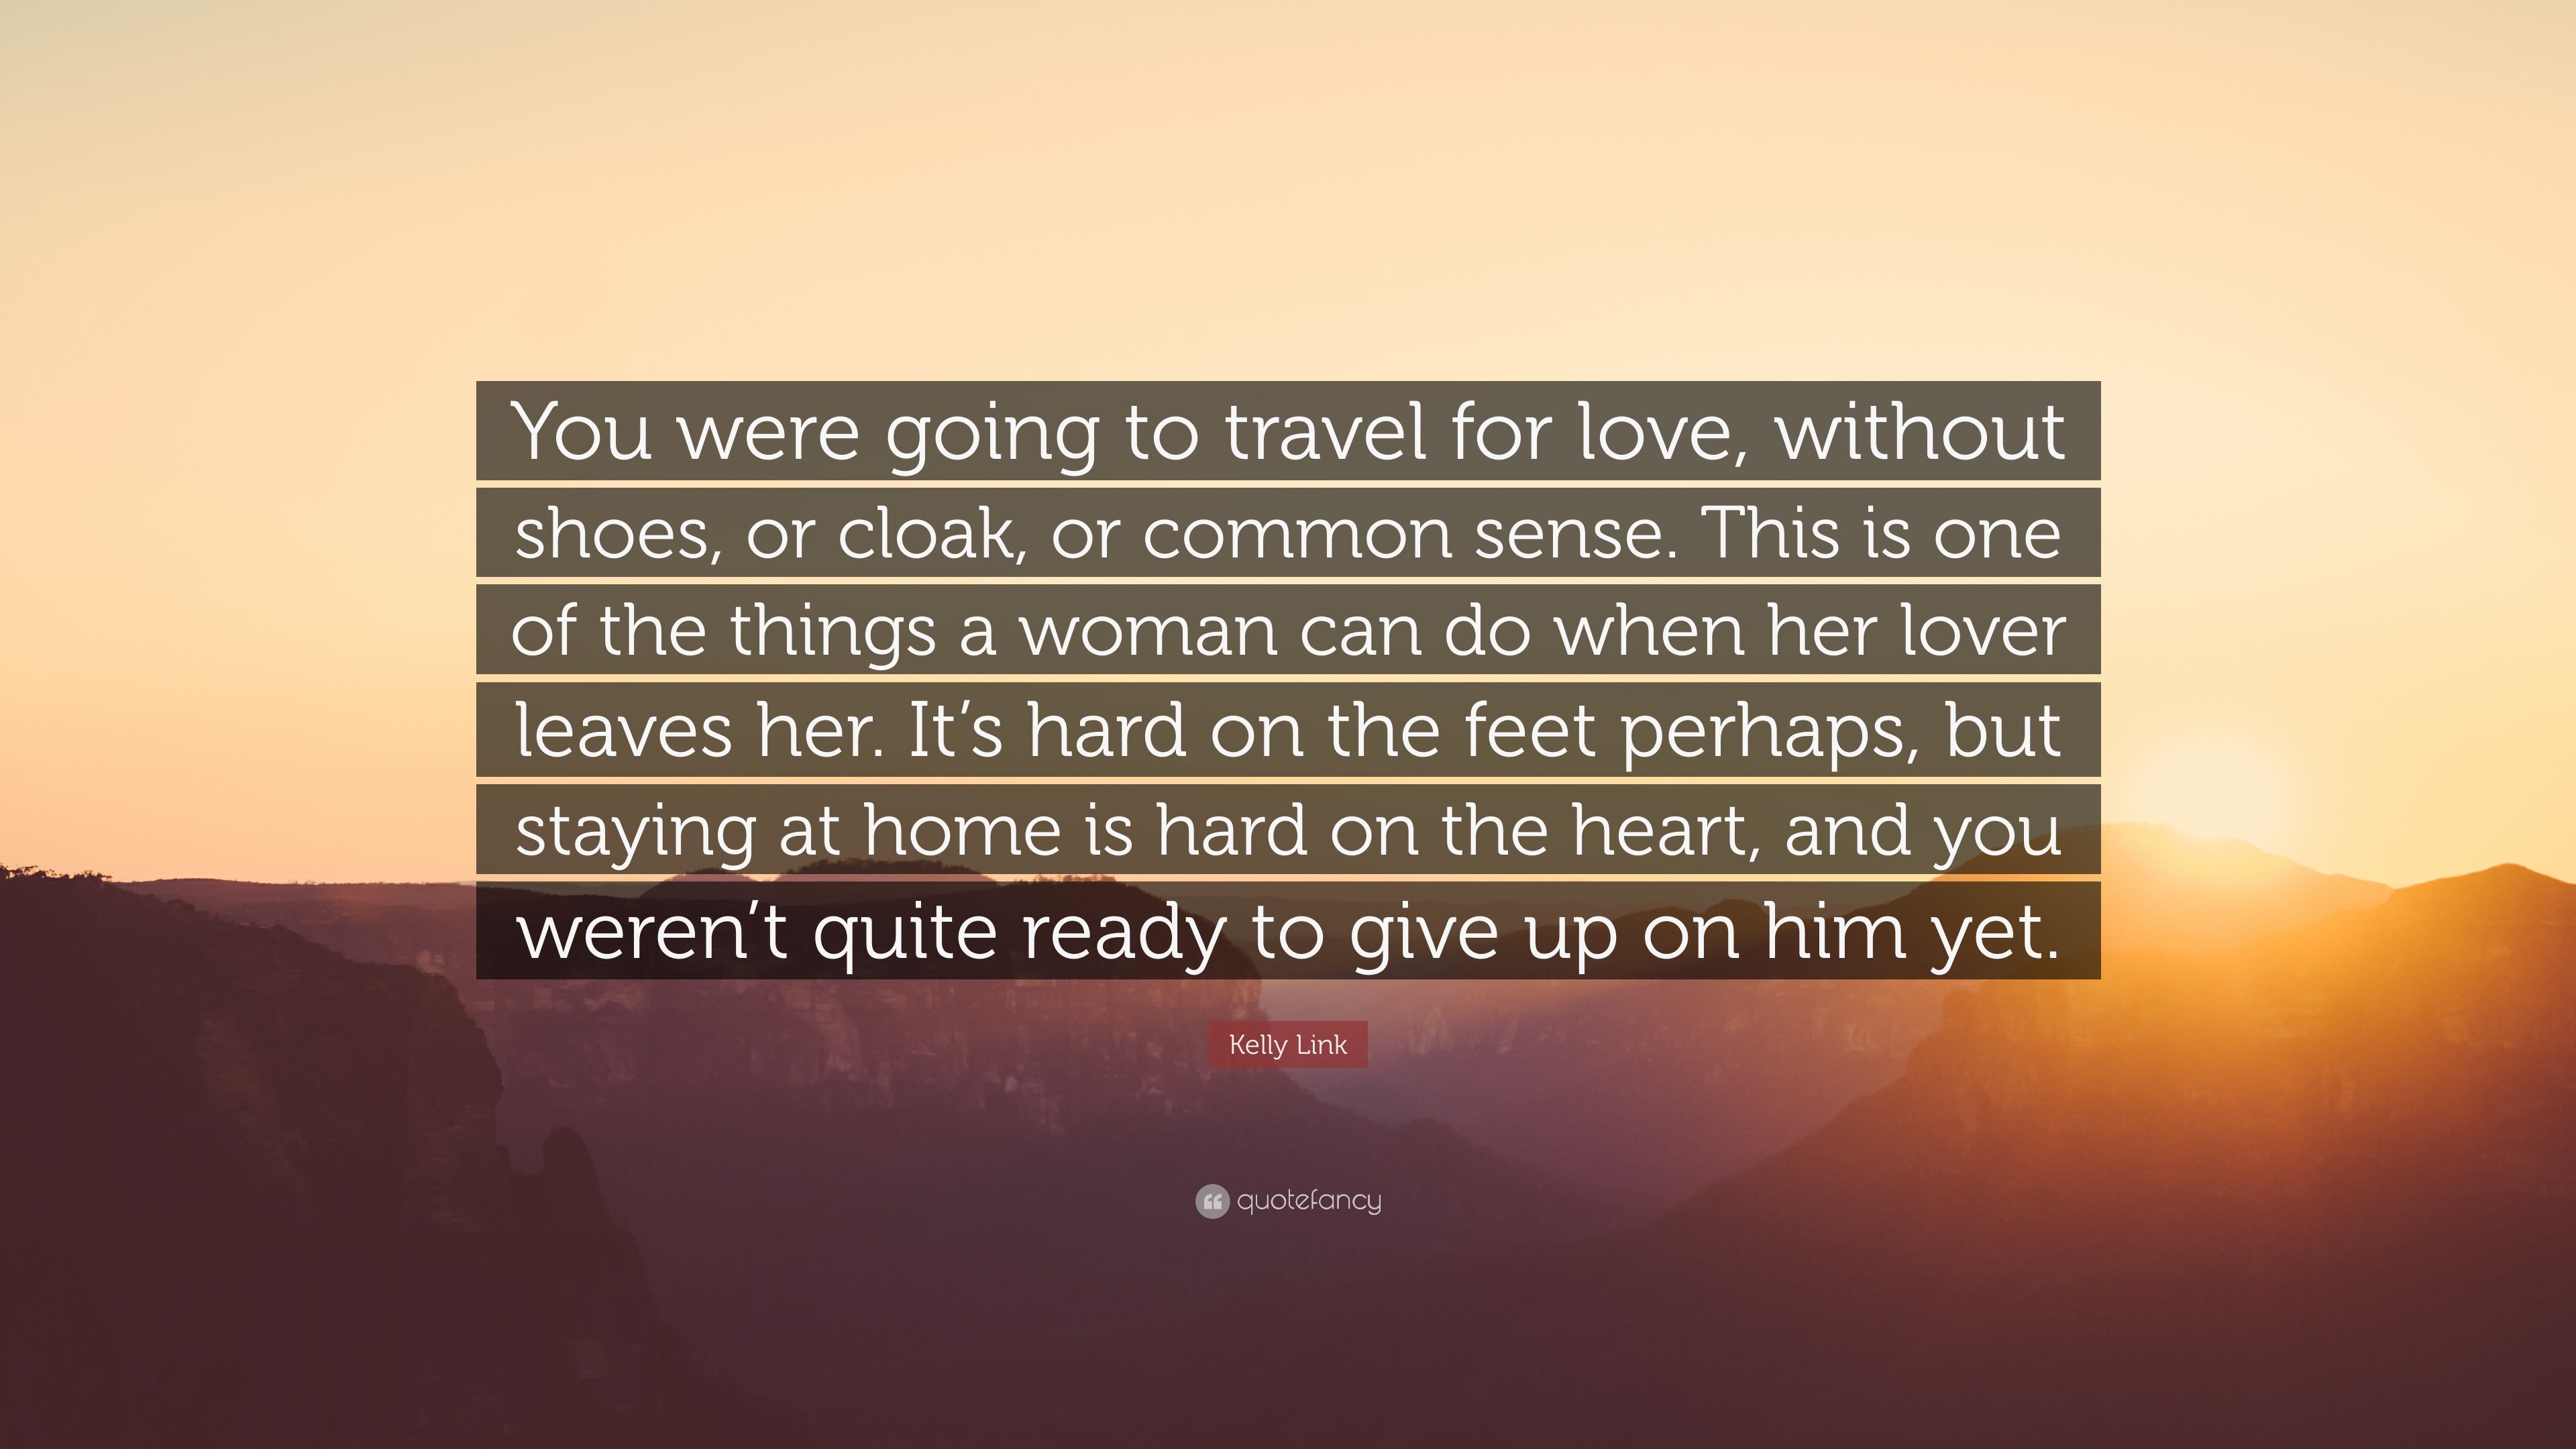 Kelly Link Quote “You were going to travel for love without shoes